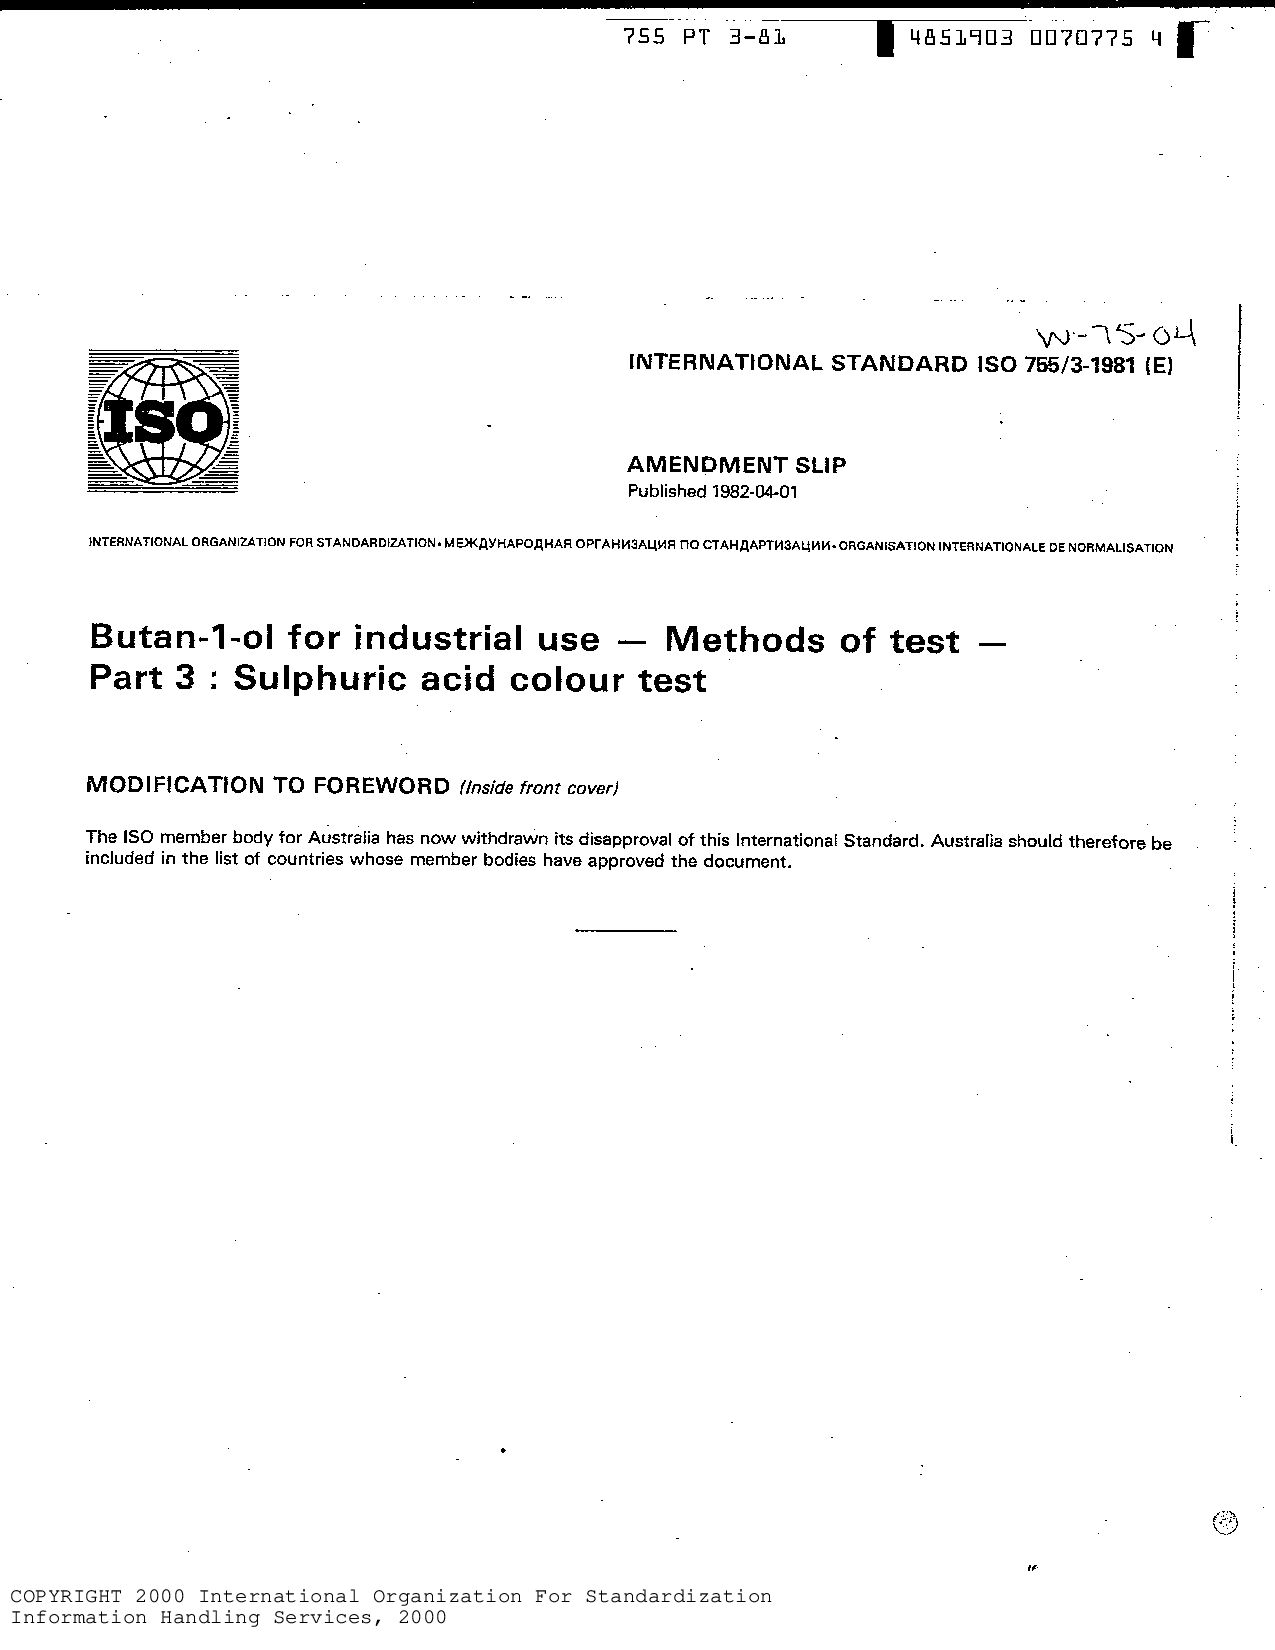 ISO 755-3:1981